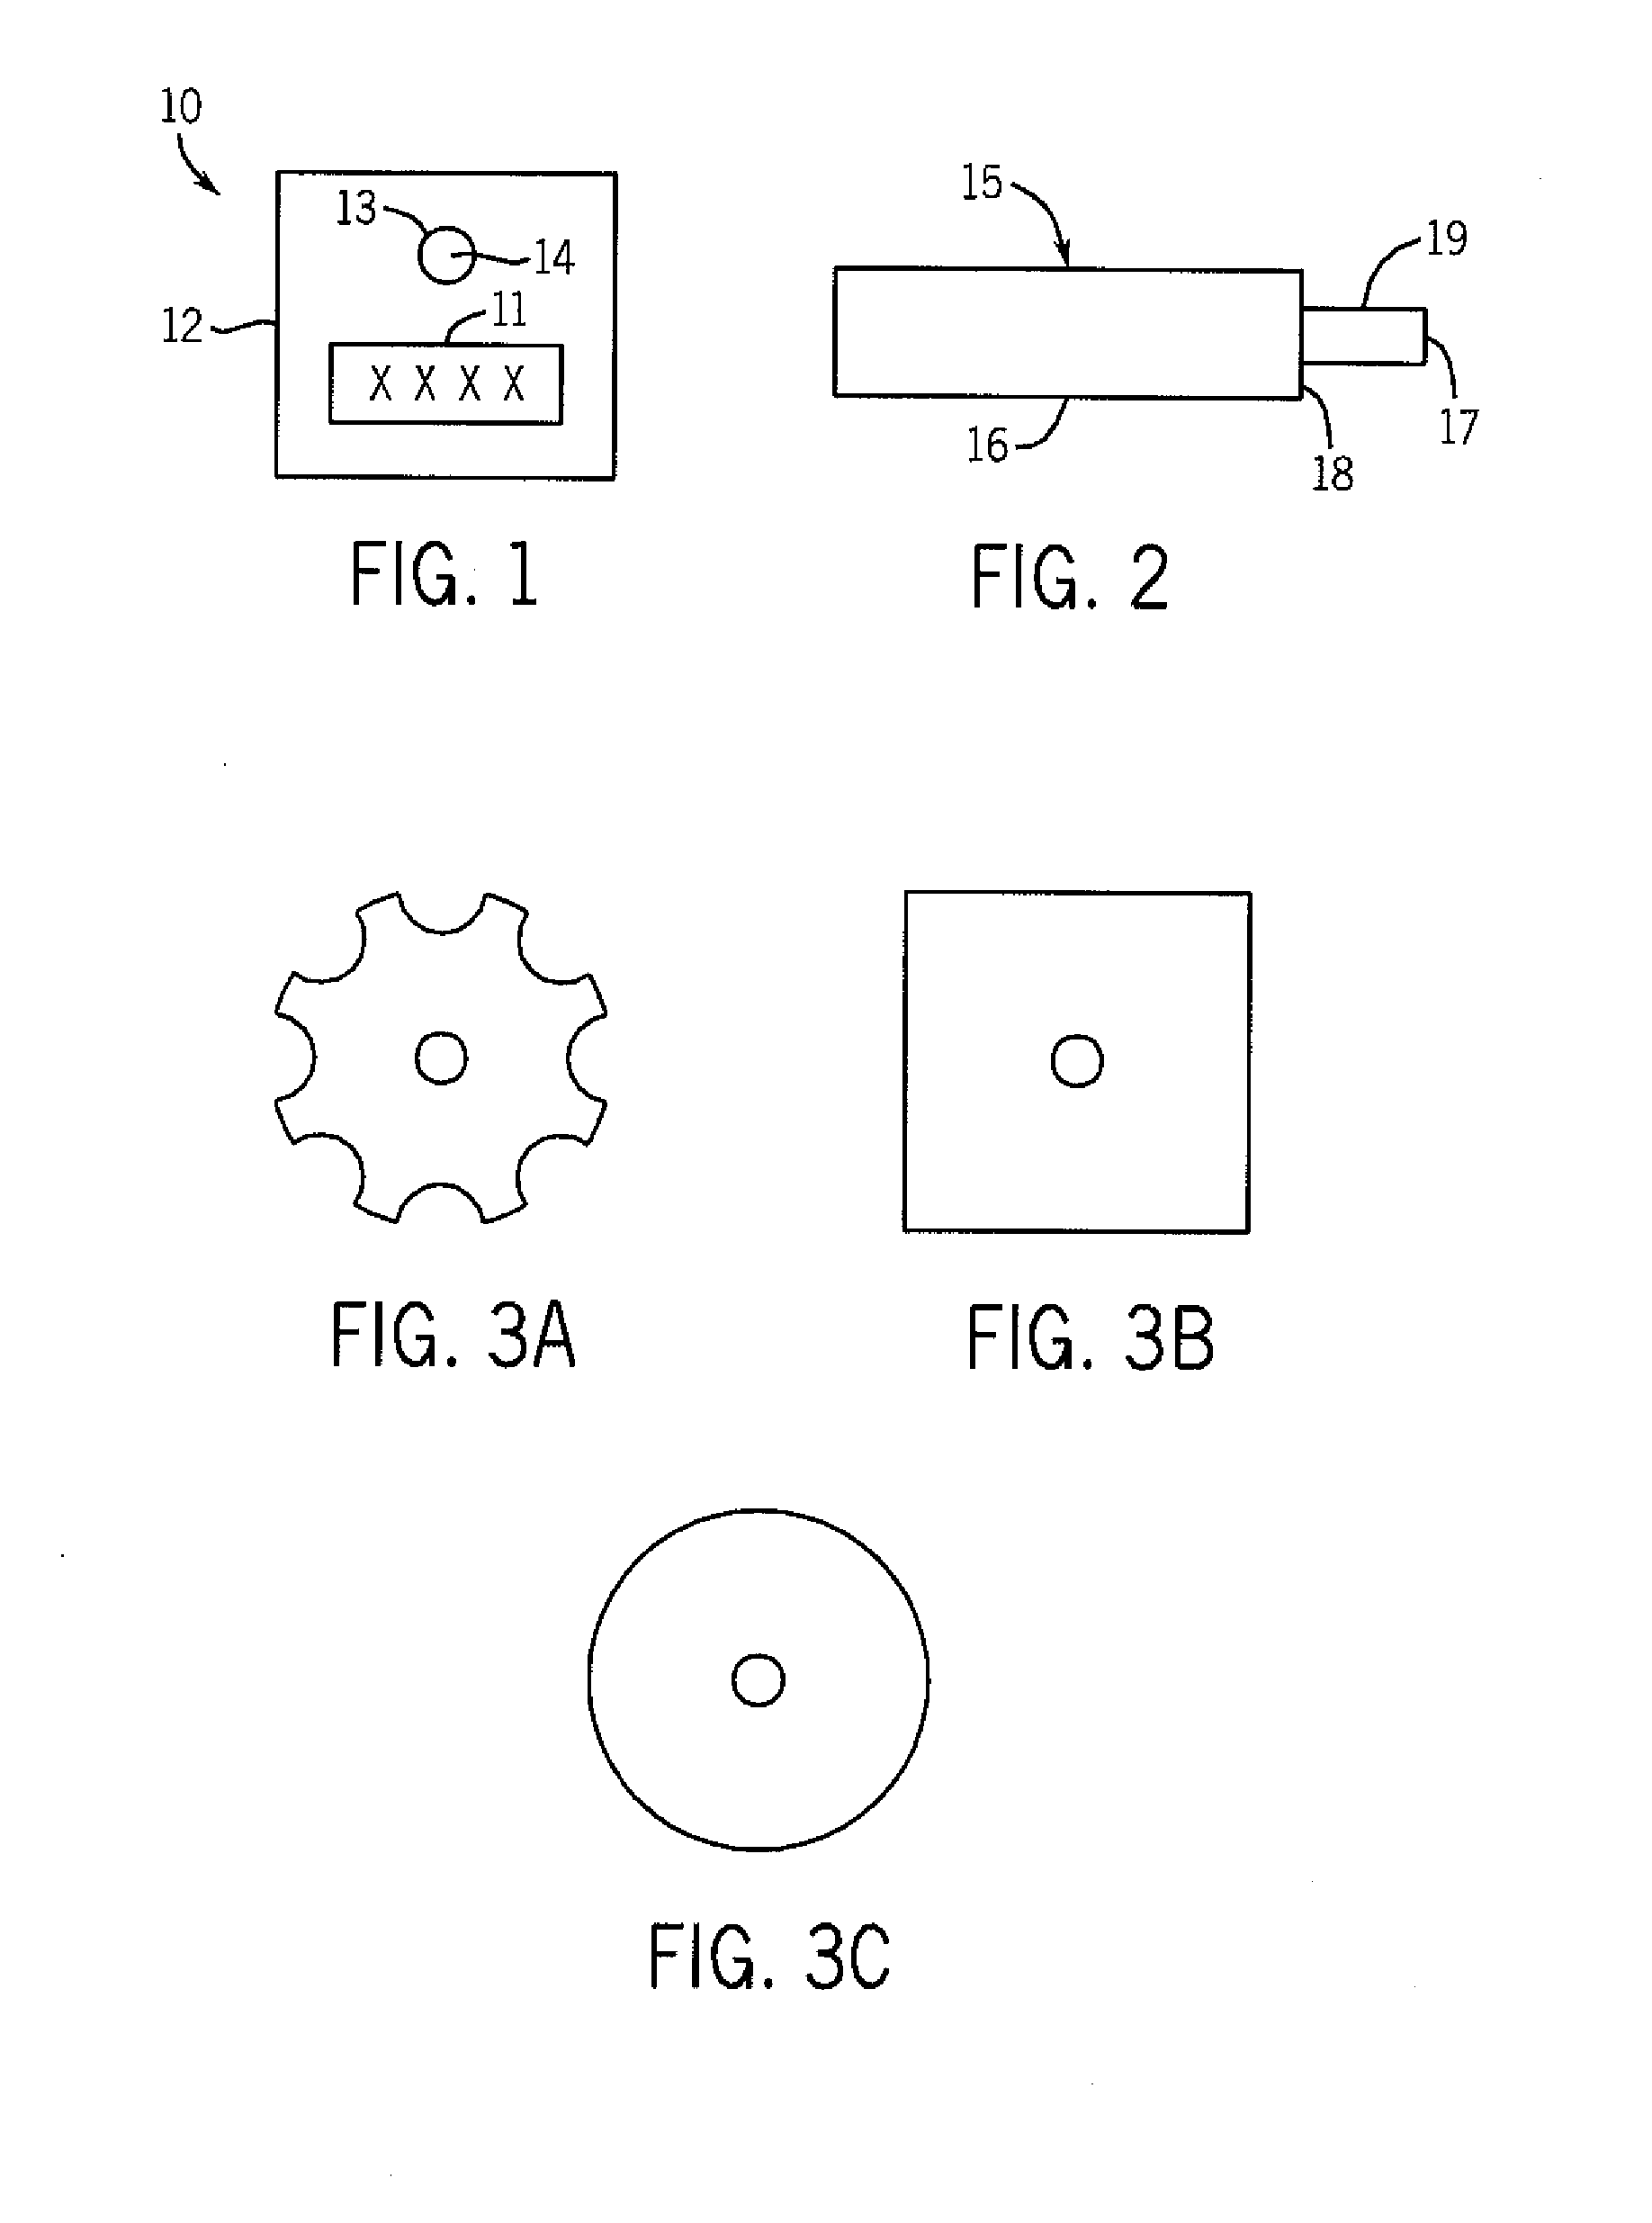 Method of Attaching a Label to a Thermoplastic Substrate